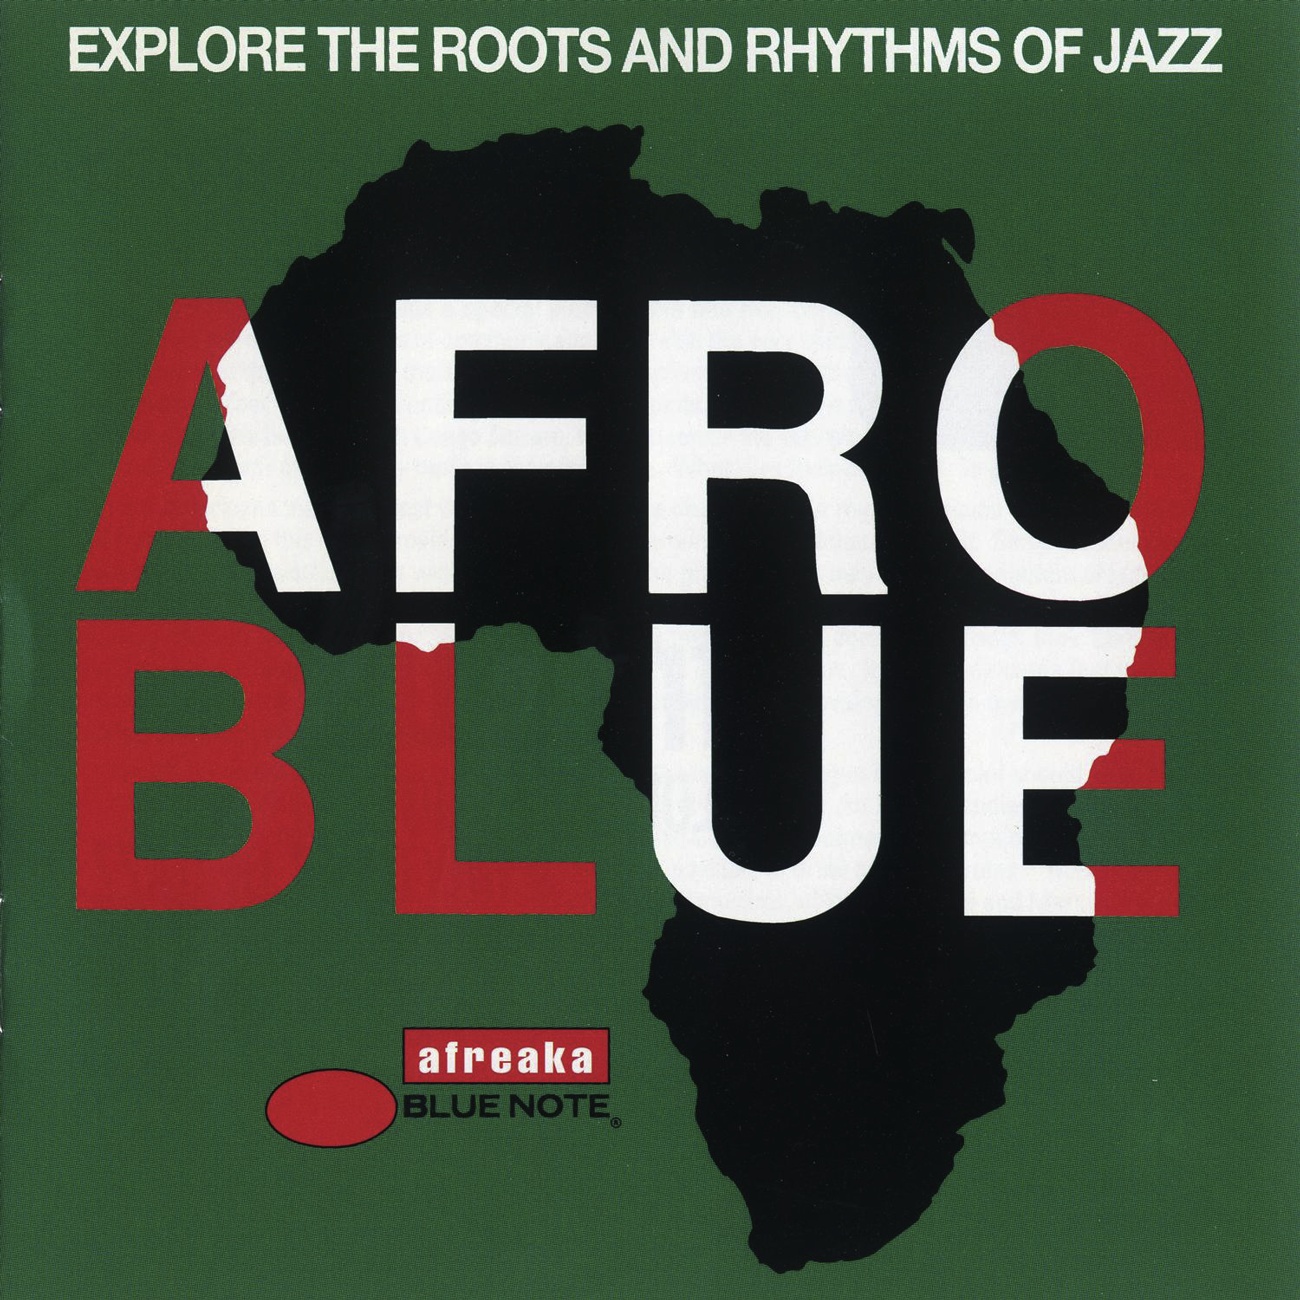 Afro Blue - Explore The Roots And Rhythms Of Jazz